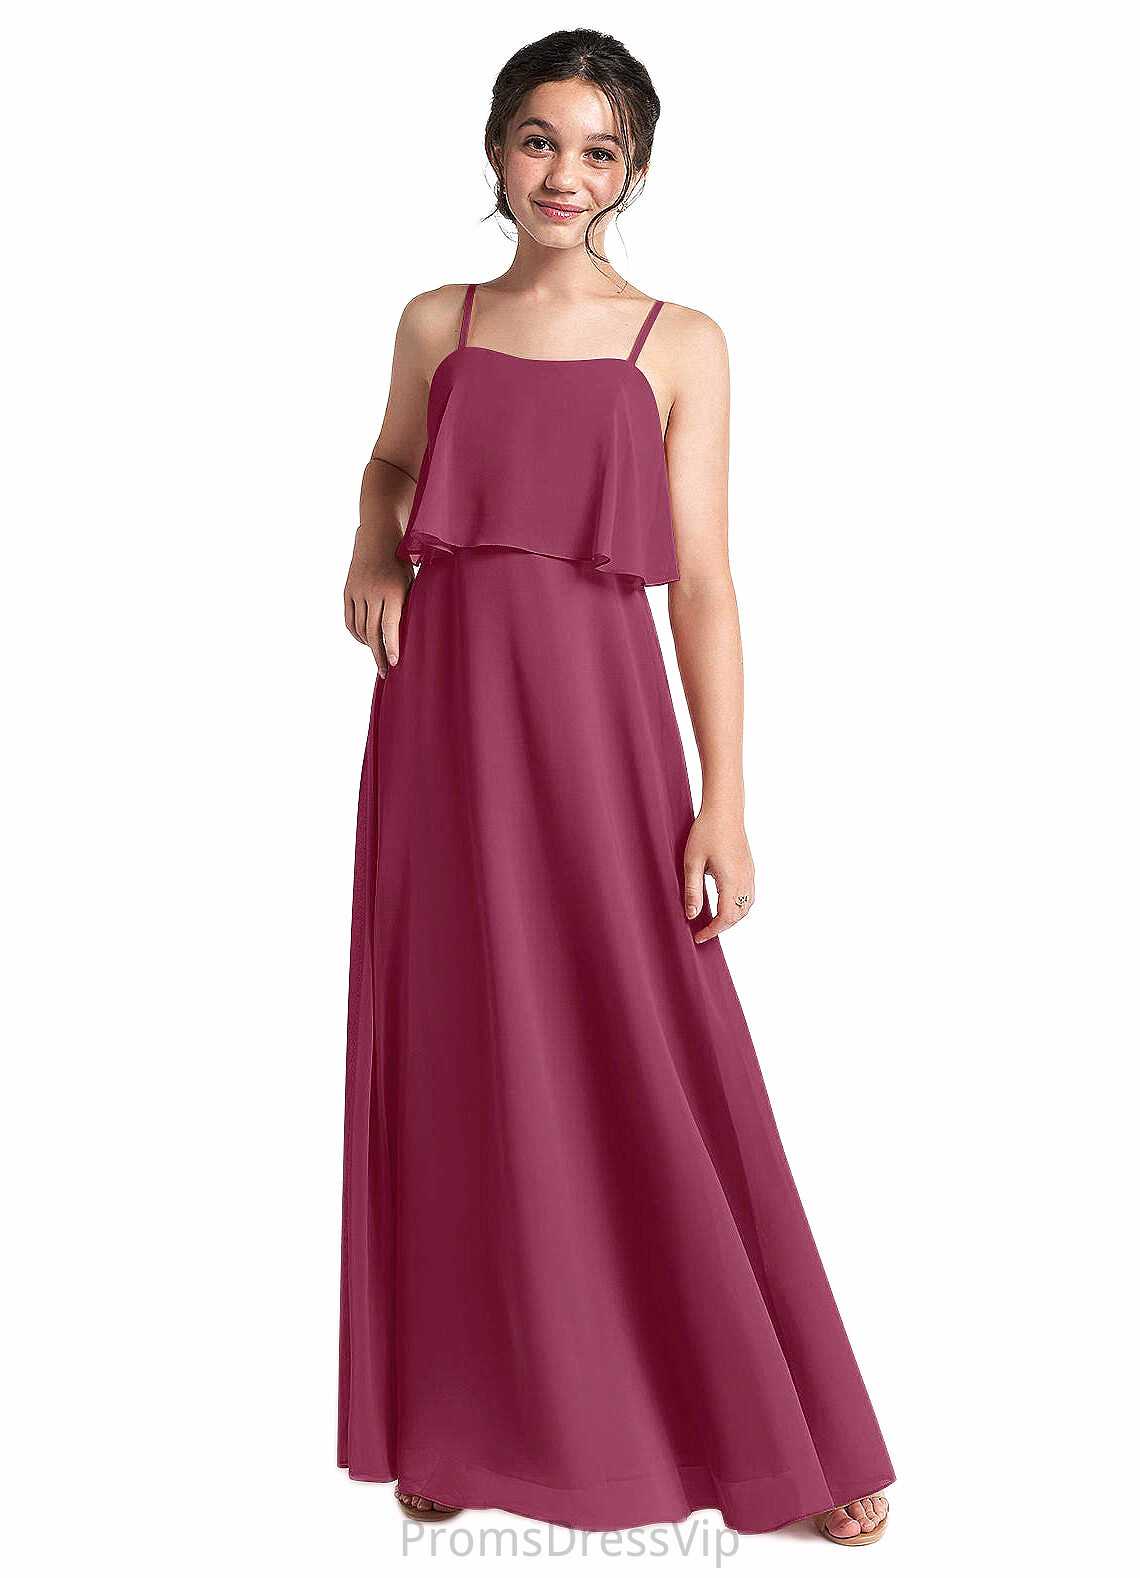 Judy A-Line Ruched Chiffon Floor-Length Junior Bridesmaid Dress Mulberry HLP0022874